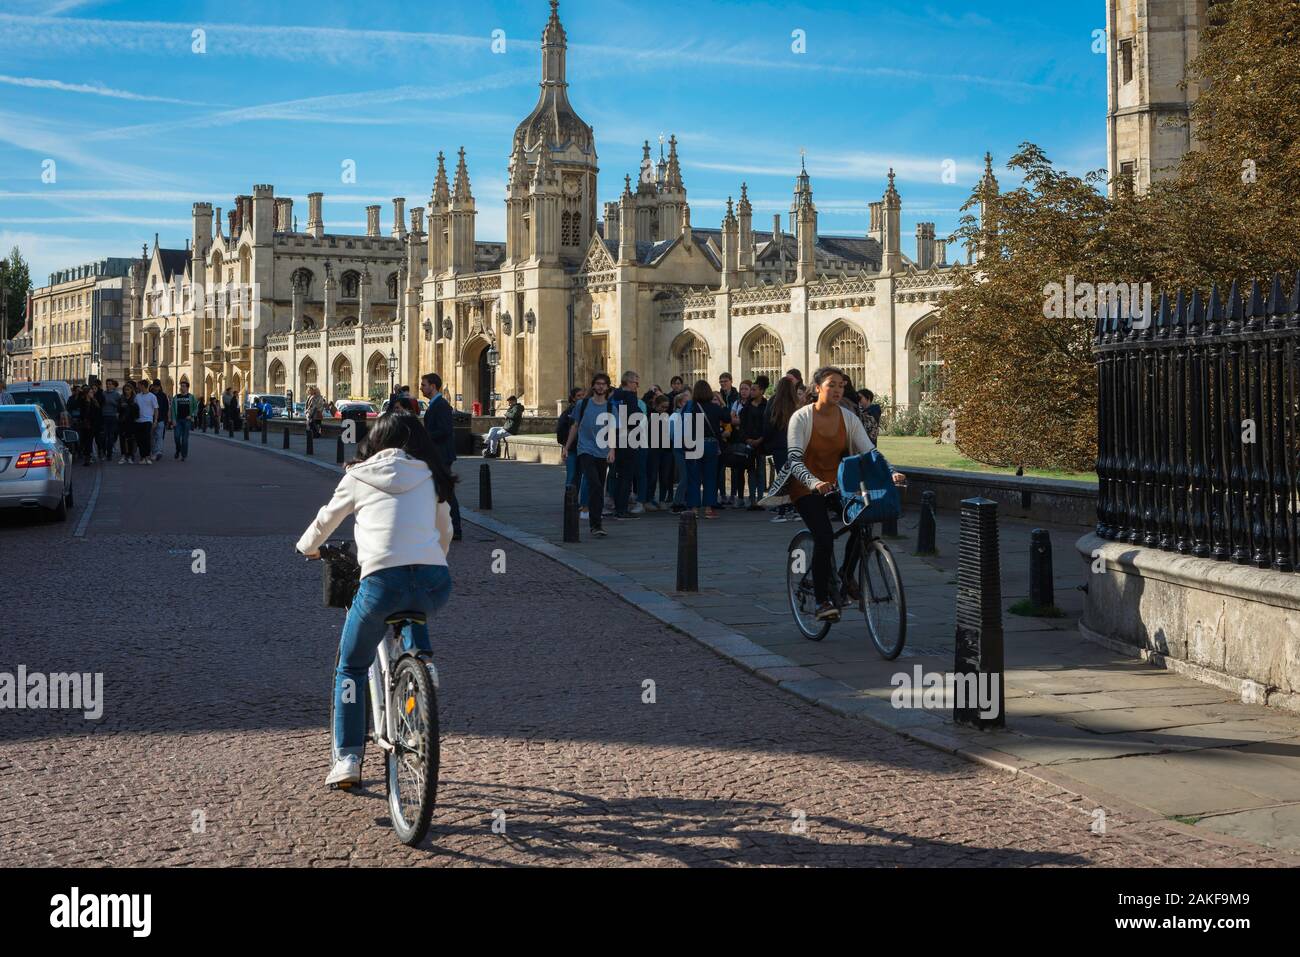 Oxbridge university, view of university students cycling in King's Parade with King's College ornate main gate visible in the distance, Cambridge, UK Stock Photo